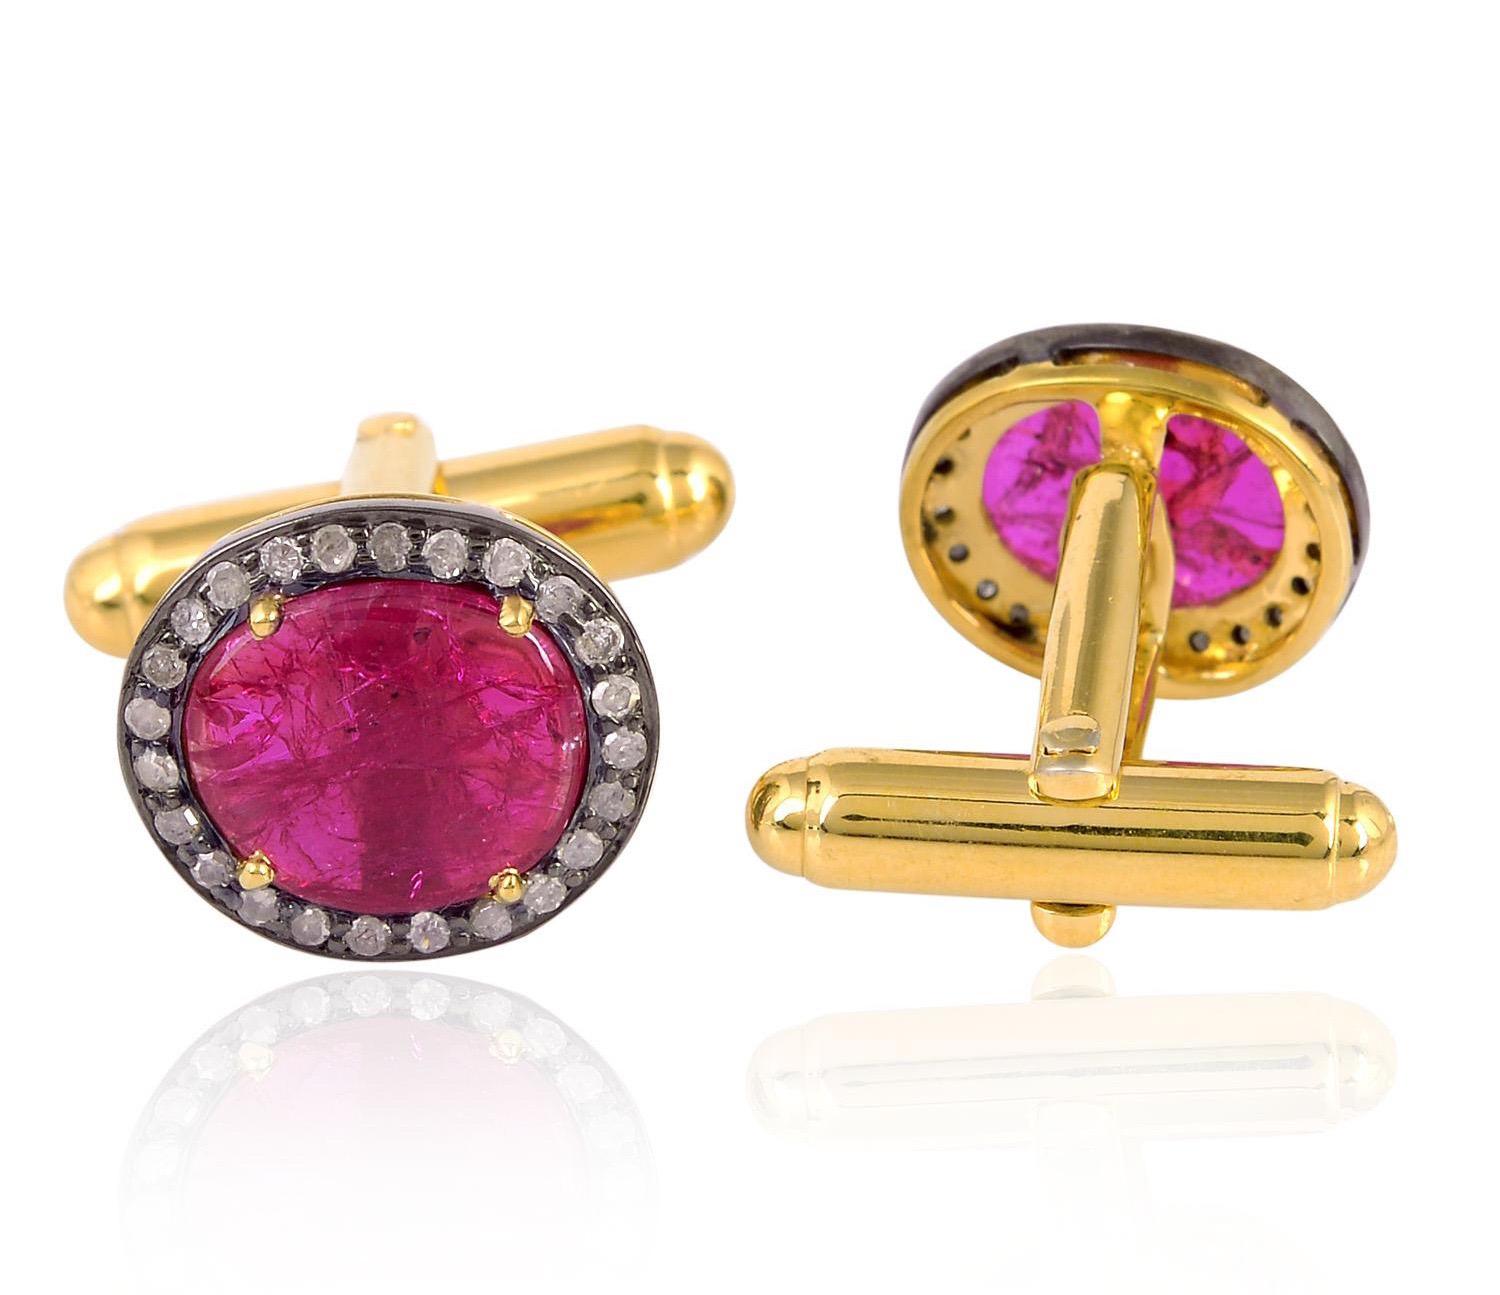 Cast from 18-karat gold and sterling silver, these cuff links are hand set with 8.75 carats Ruby and .43 carats of pave diamonds in blackened finish.

FOLLOW  MEGHNA JEWELS storefront to view the latest collection & exclusive pieces.  Meghna Jewels